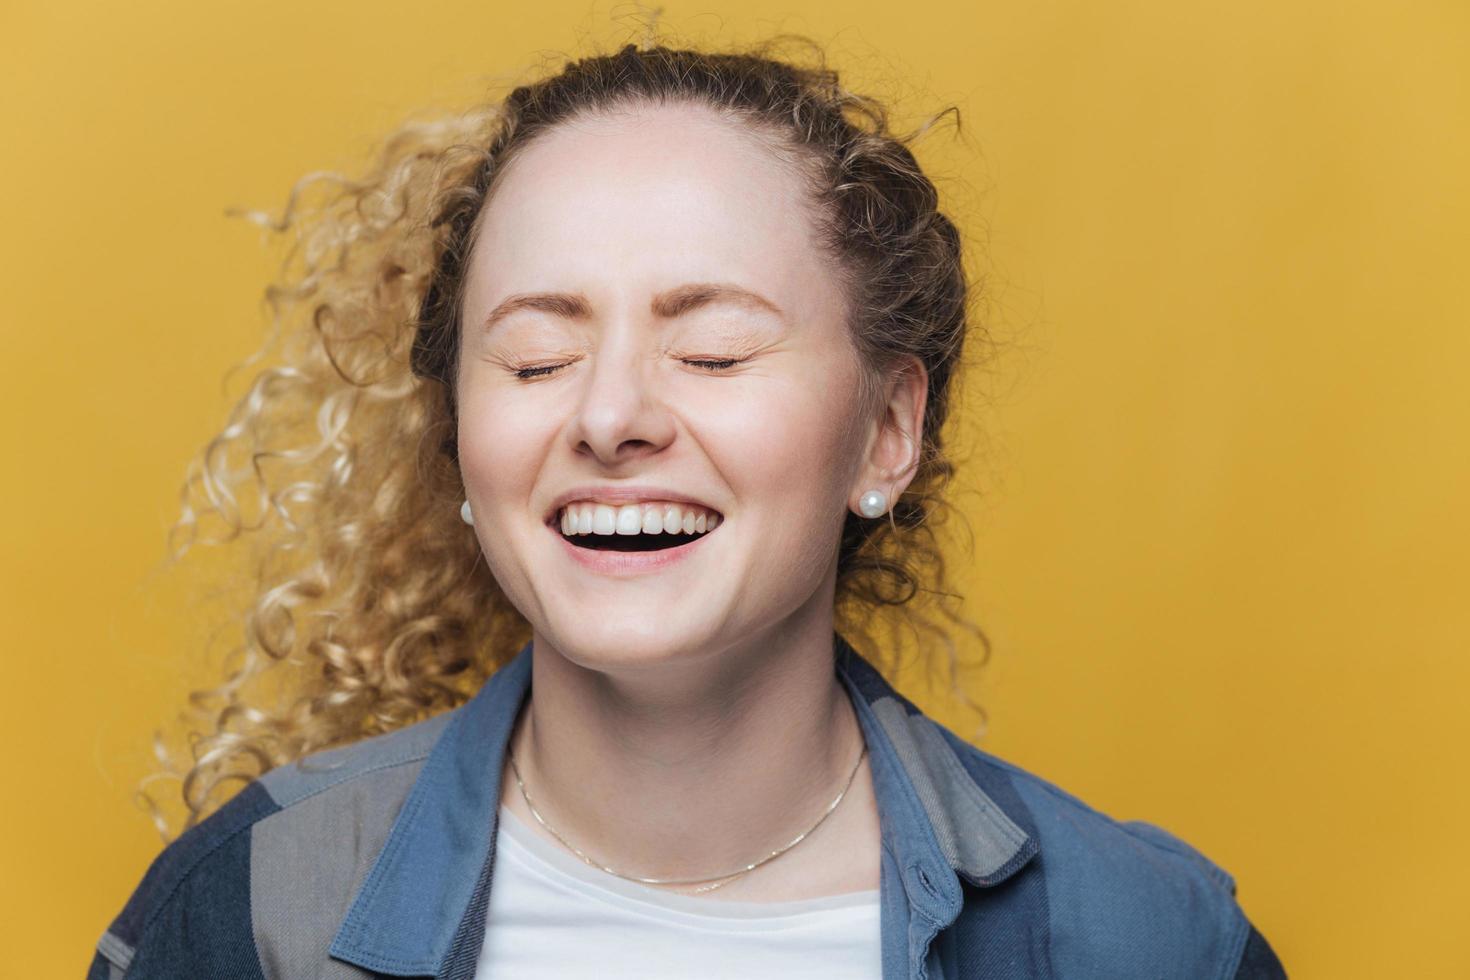 Overjoyed beautiful female laughs joyfully as hears good joke, smiles broadly, keeps eyes shut, has curly hair, isolated over yellow background. Cute young woman poses indoor, expresses happiness photo